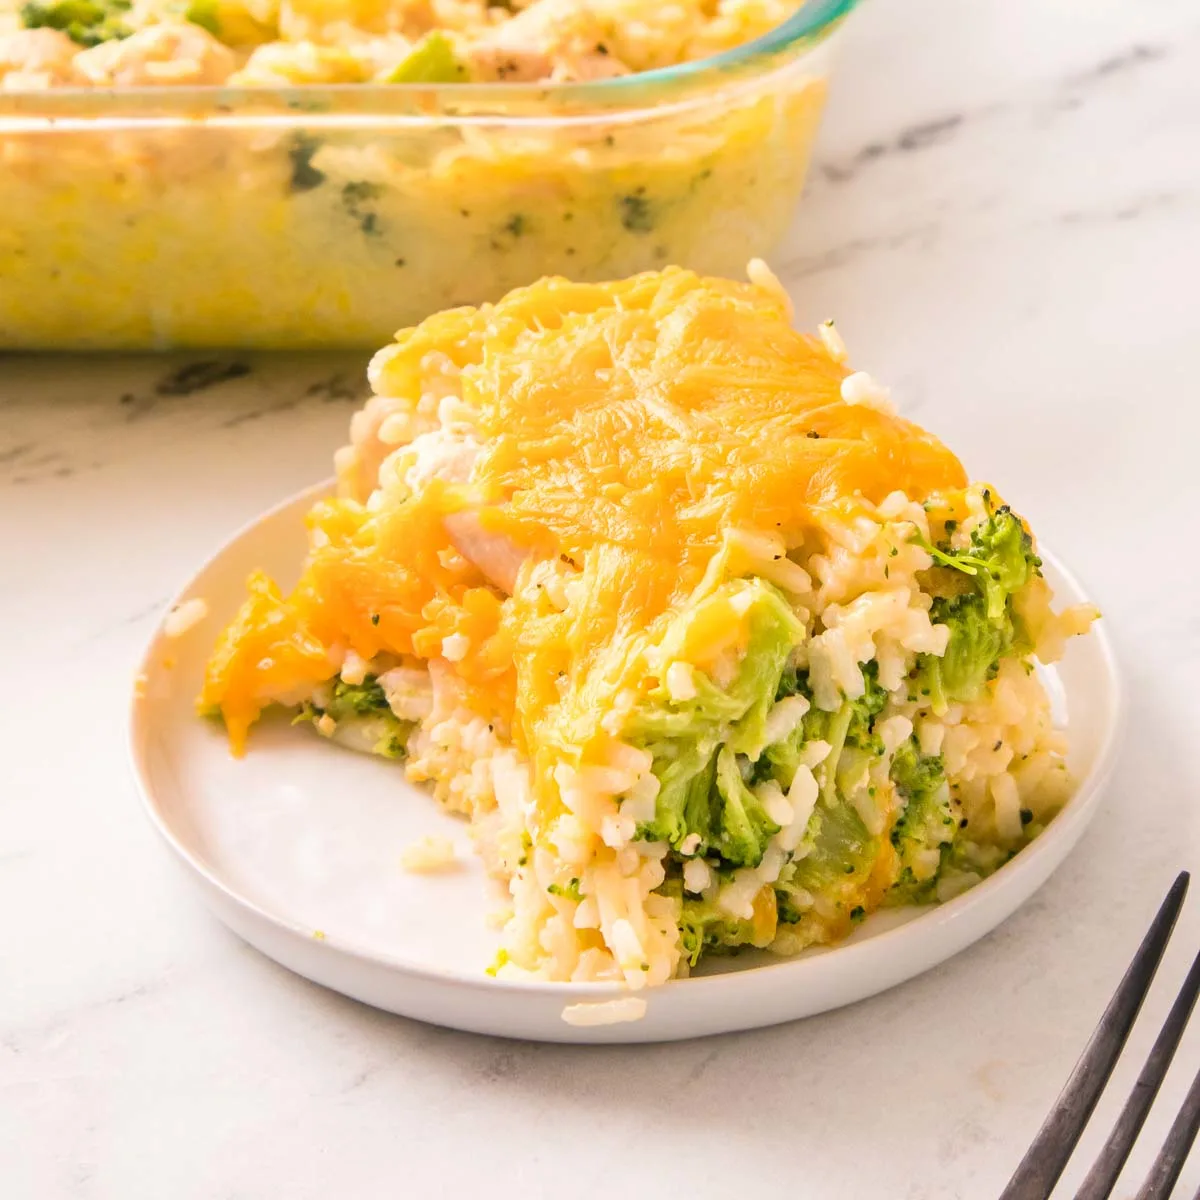 A serving of chicken, broccoli, and rice casserole topped with cheese.